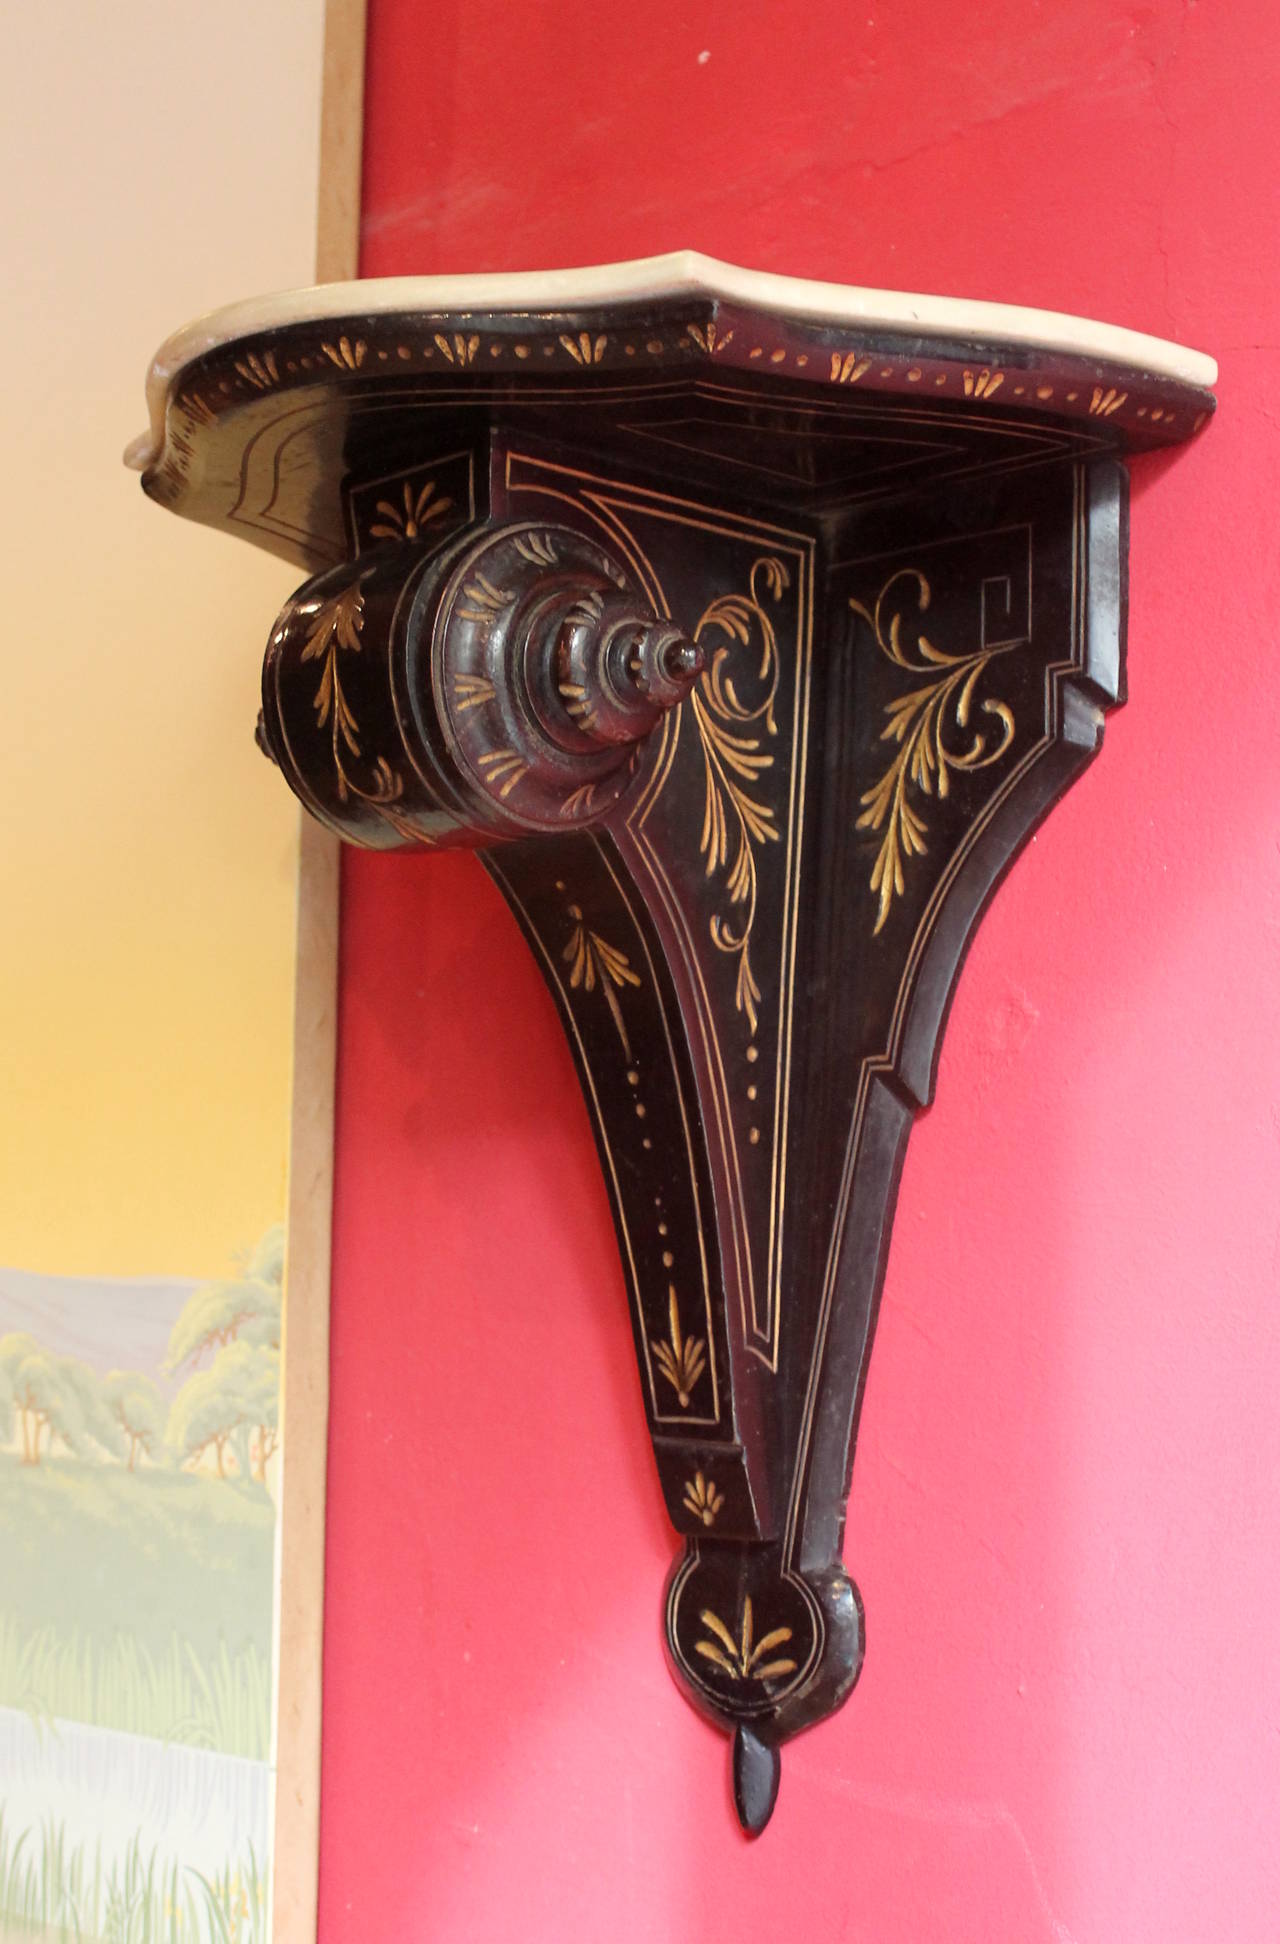 A highly decorative 19th century pair of Neogothic revival ebonized wall bracket of exceptionally fine quality. The shelves are made of ebonized black intricately carved wood moulding with an egg and dart design featuring a scroll shape. They are